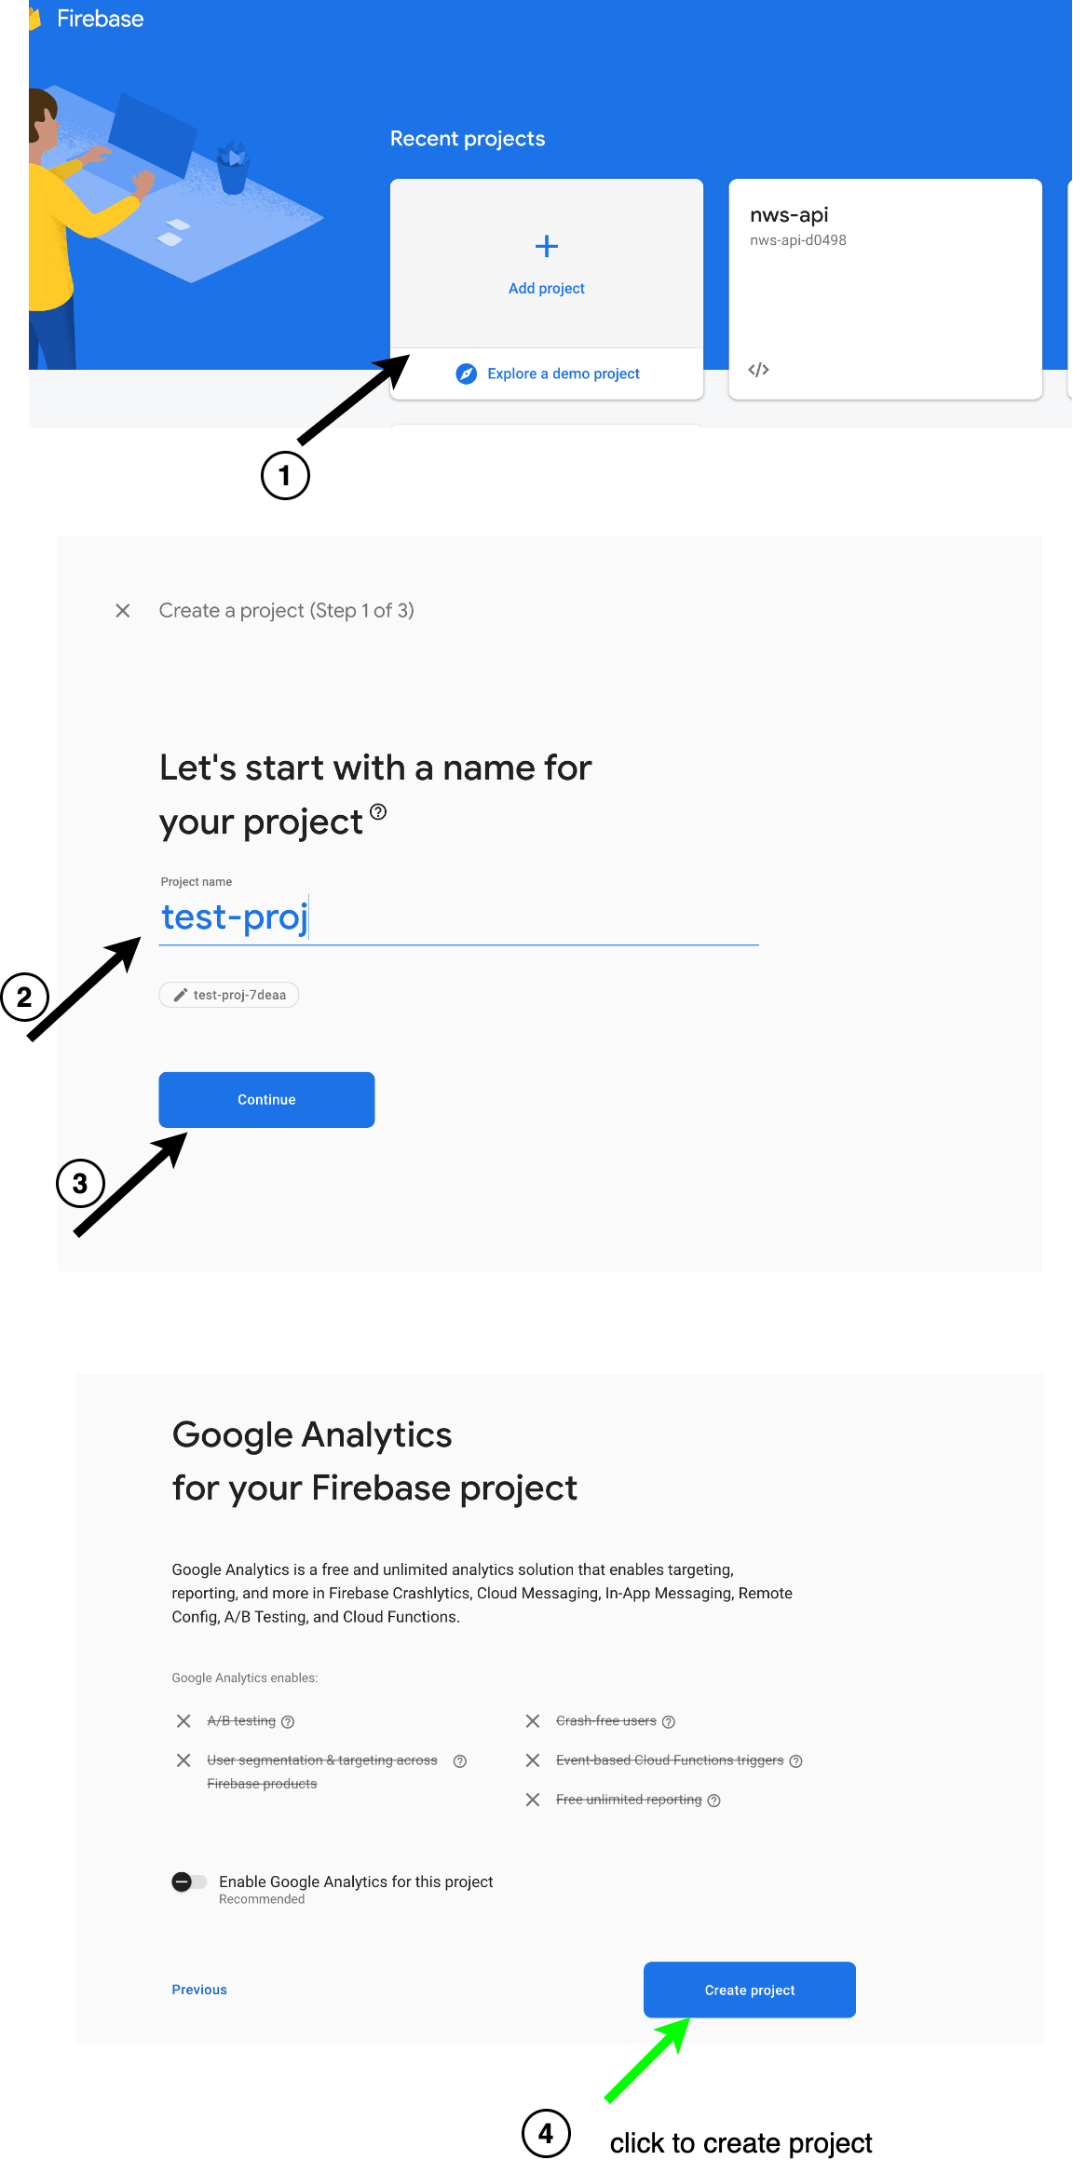 In Firebase: 1 Add project. 2 name project. 3 continue. 4 create project